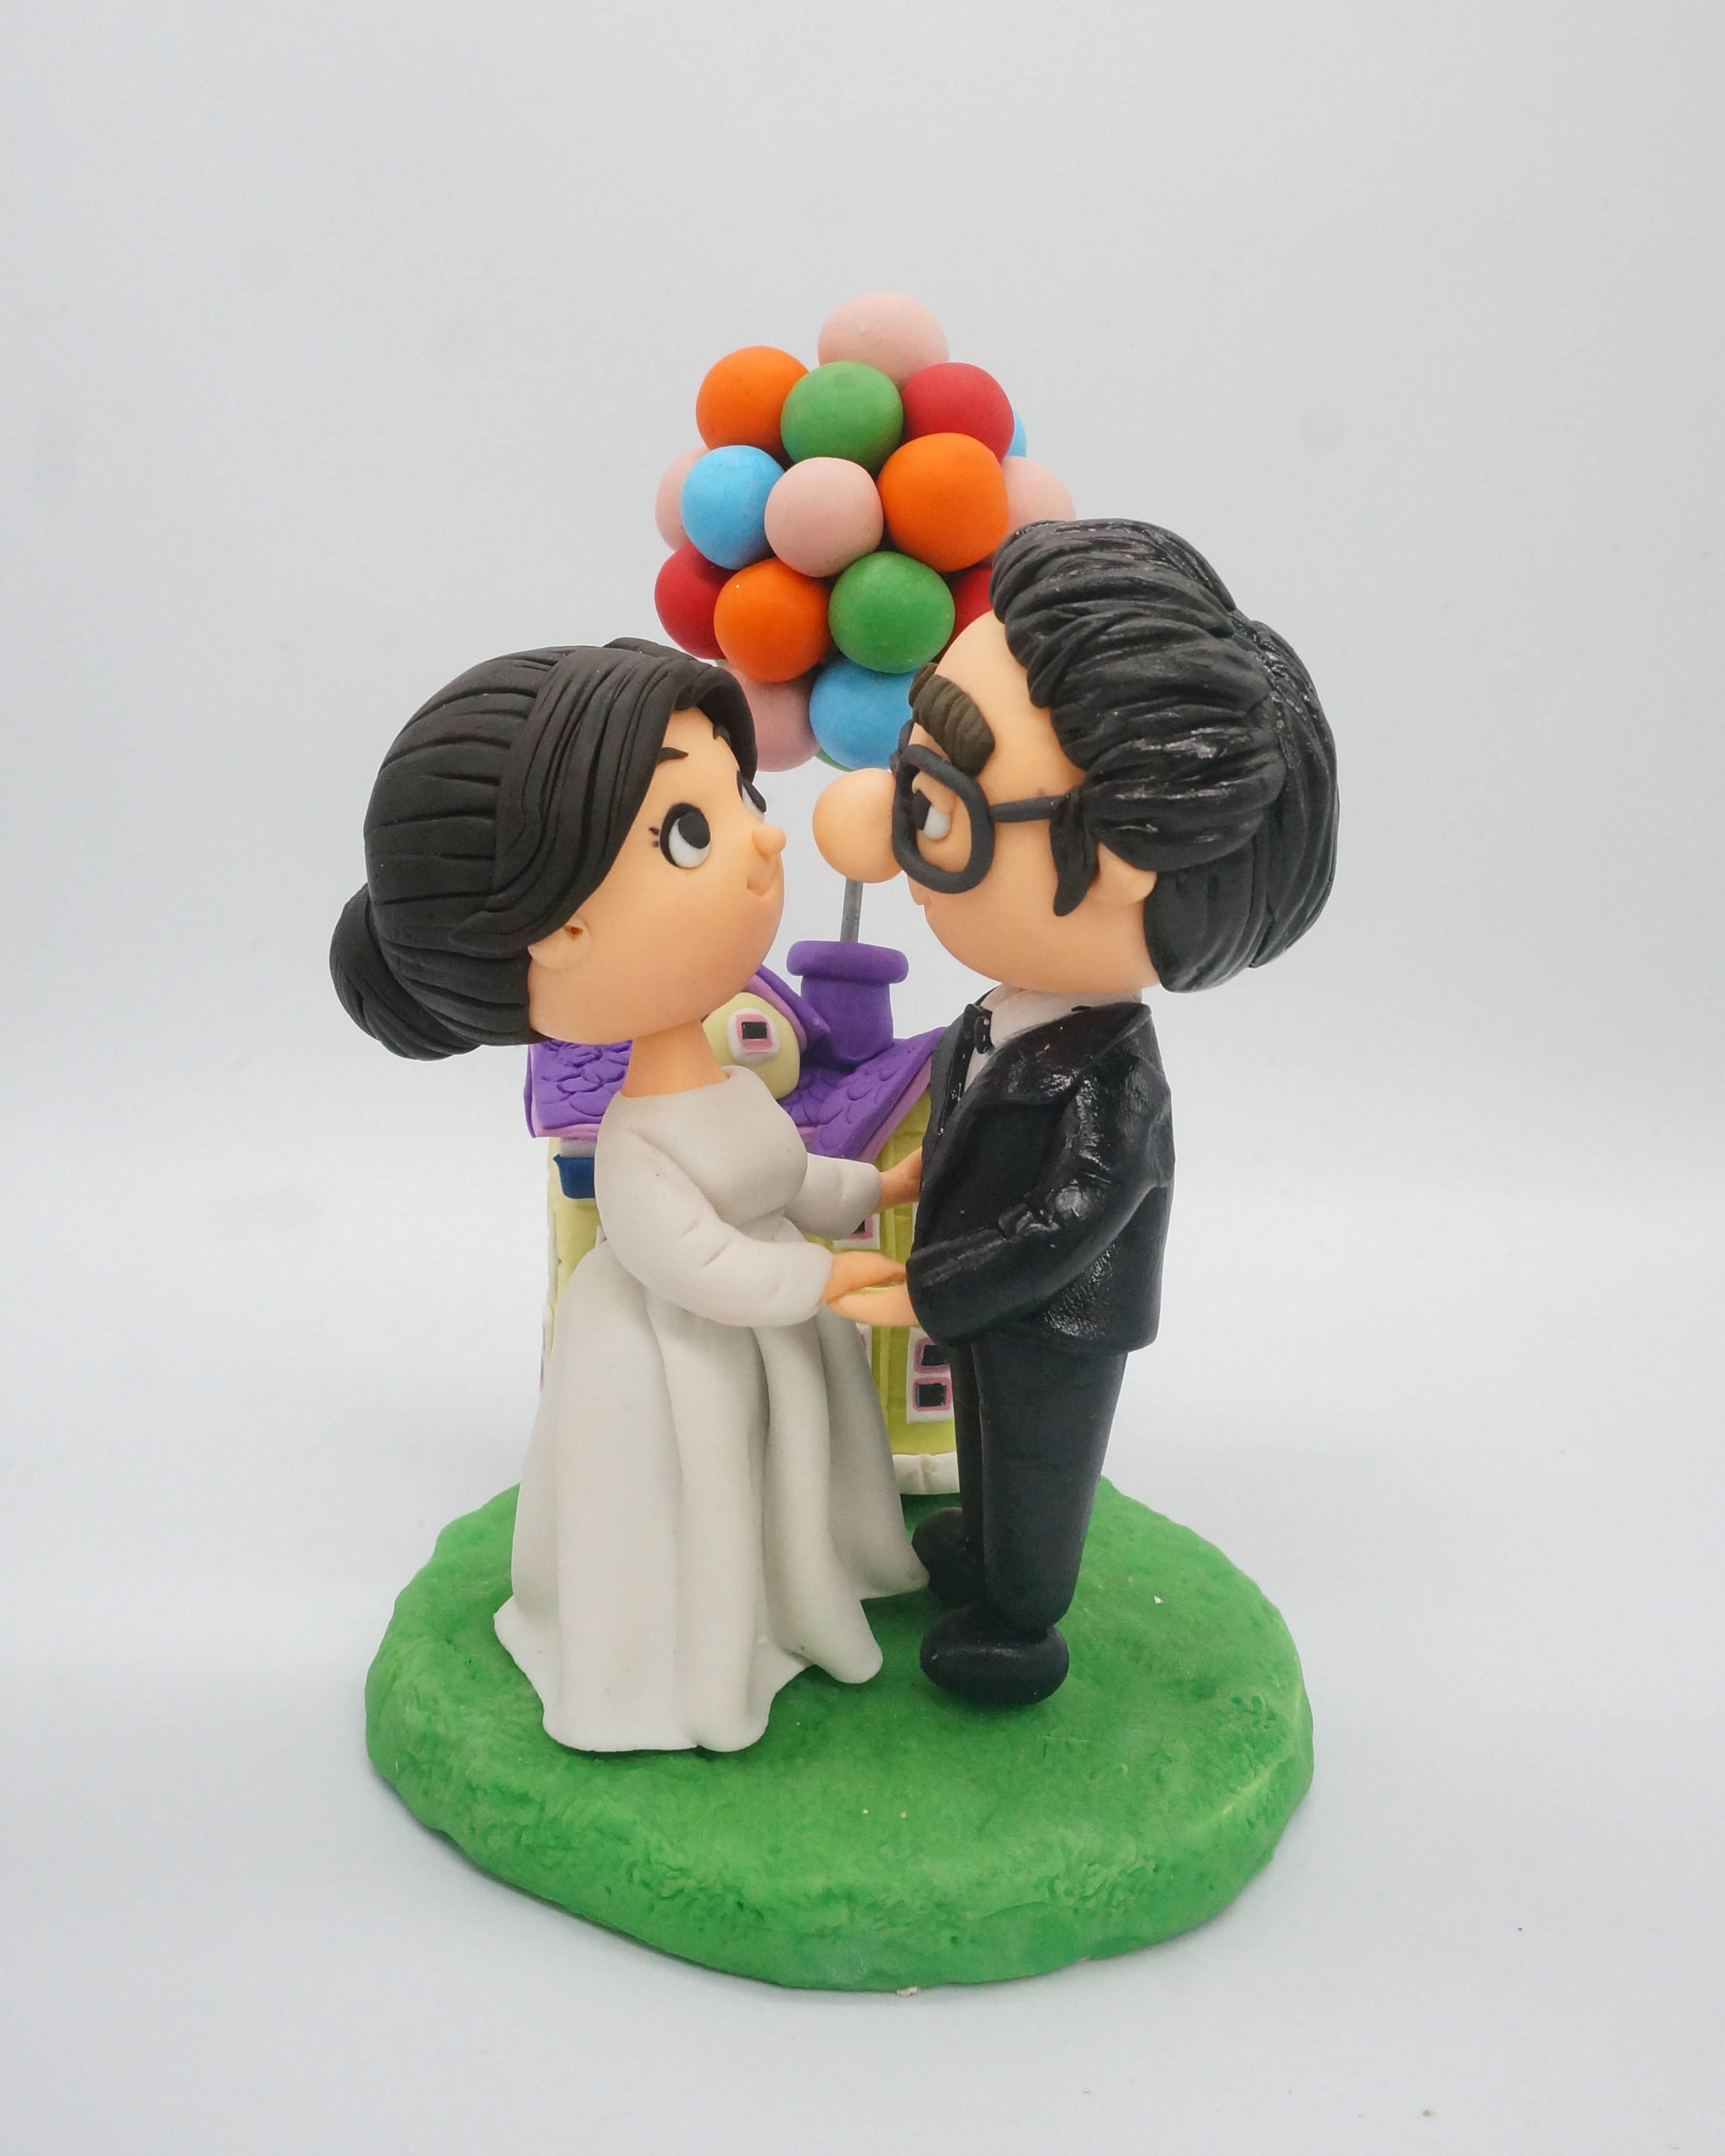 Picture of Ellie & Carl Wedding Cake Toper, Up House Movie Inspired Wedding Cake Topper